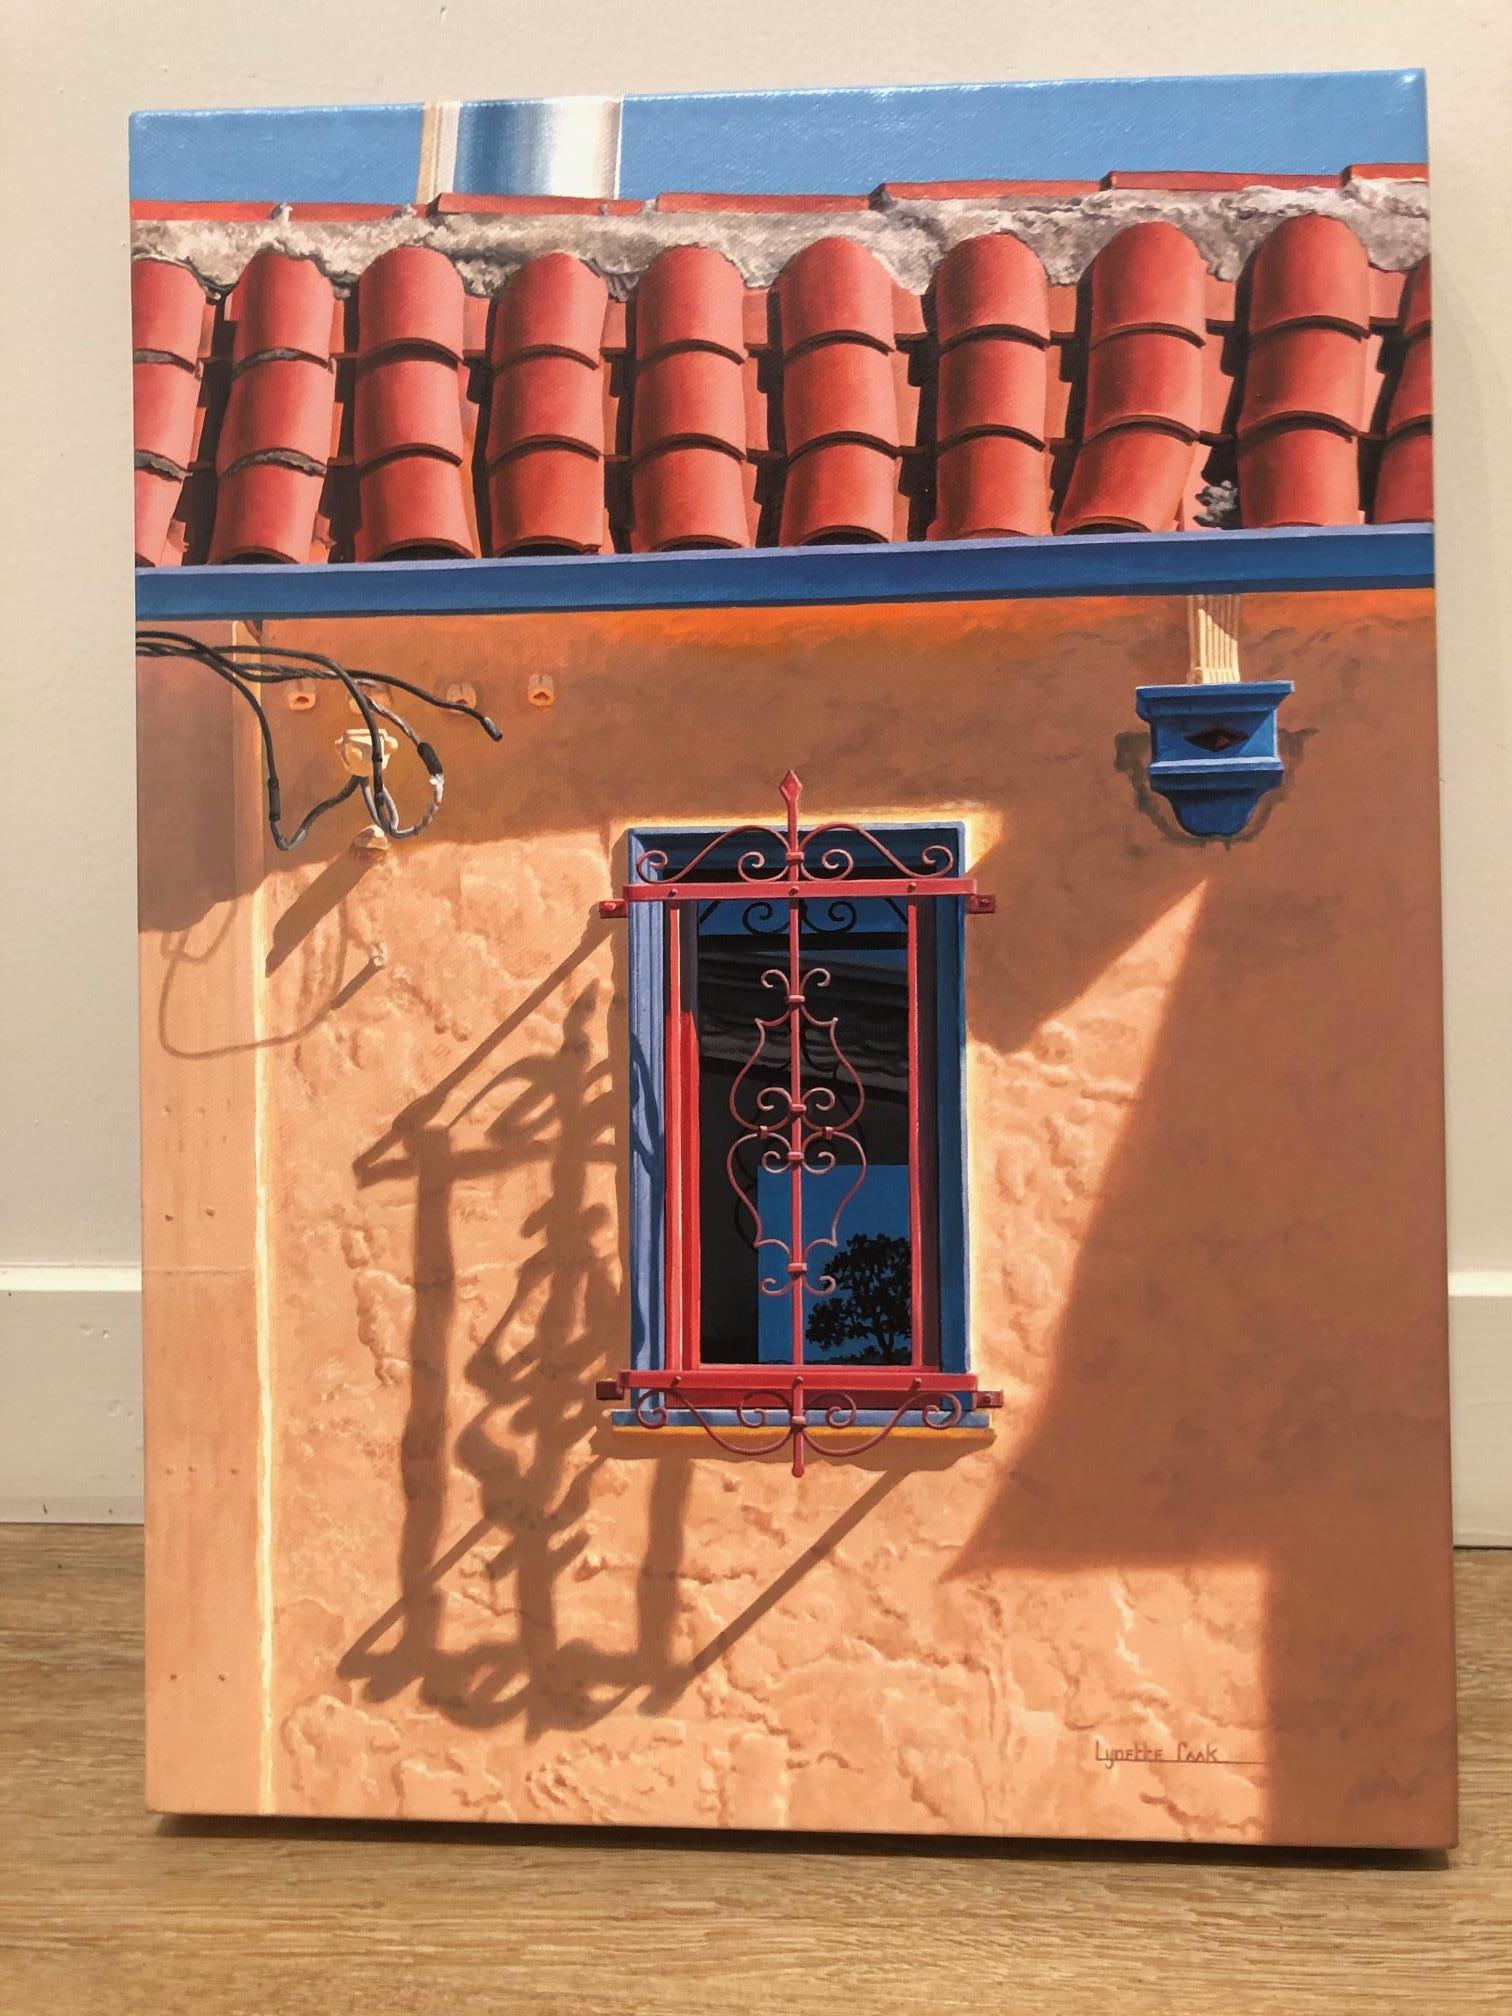 'Edge: McAllister Charm' depicts the sun lit facade of a building with terra-cotta roof tiles and a tree reflected in a blue window.   The work of art is meticulously hand painted by Lynette Cook, who realistically depicts scenes that she sees